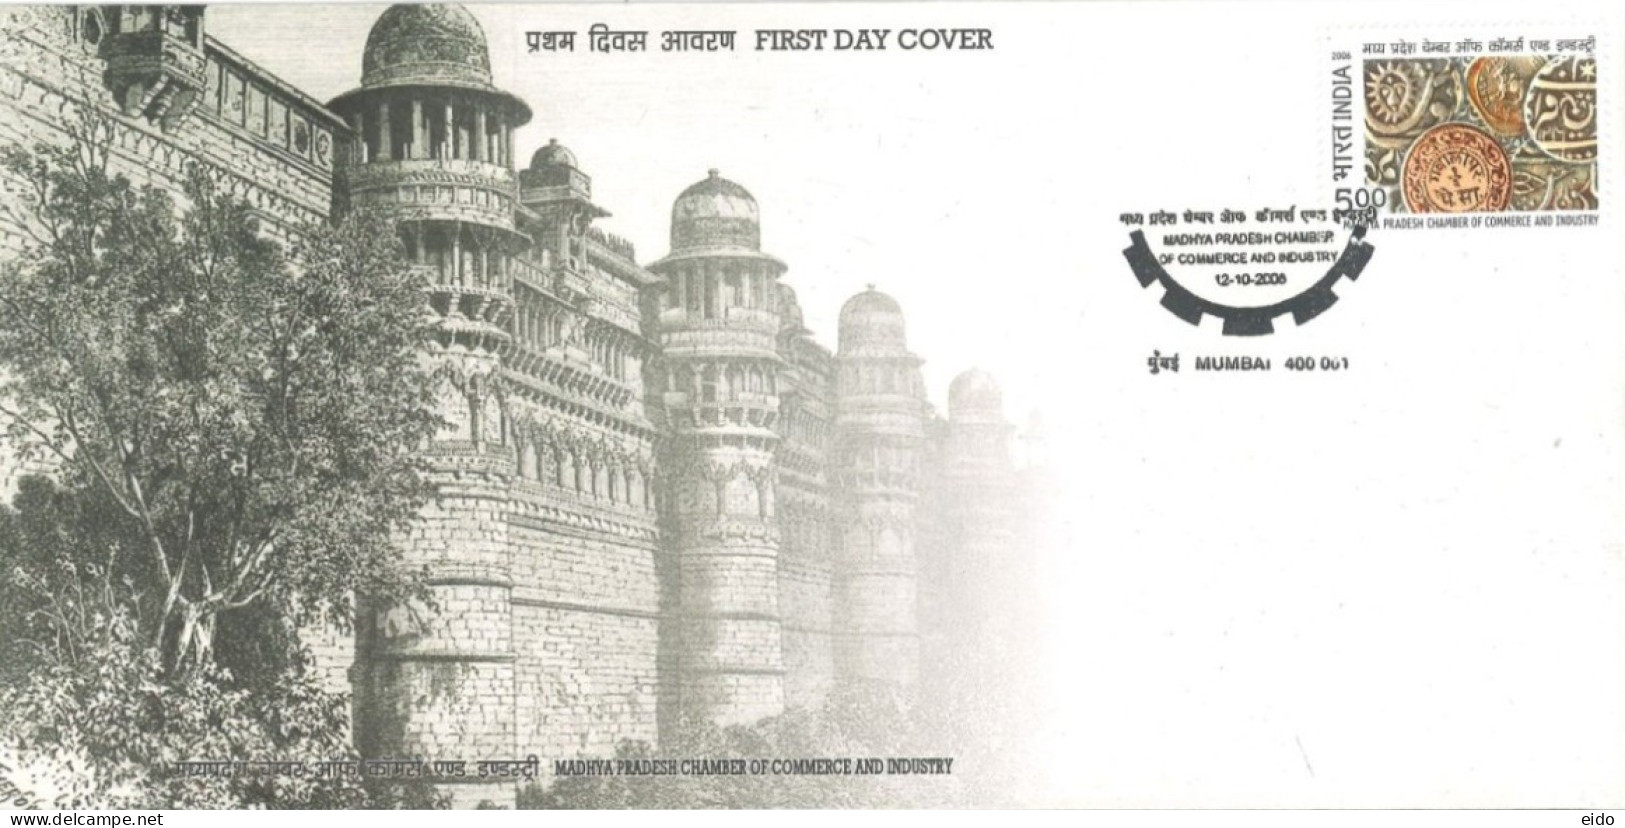 INDIA - 2006 - FDC STAMP OF MADHYA PRADESH CHAMBER OF COMMERCE AND INDUSTRY. - Brieven En Documenten